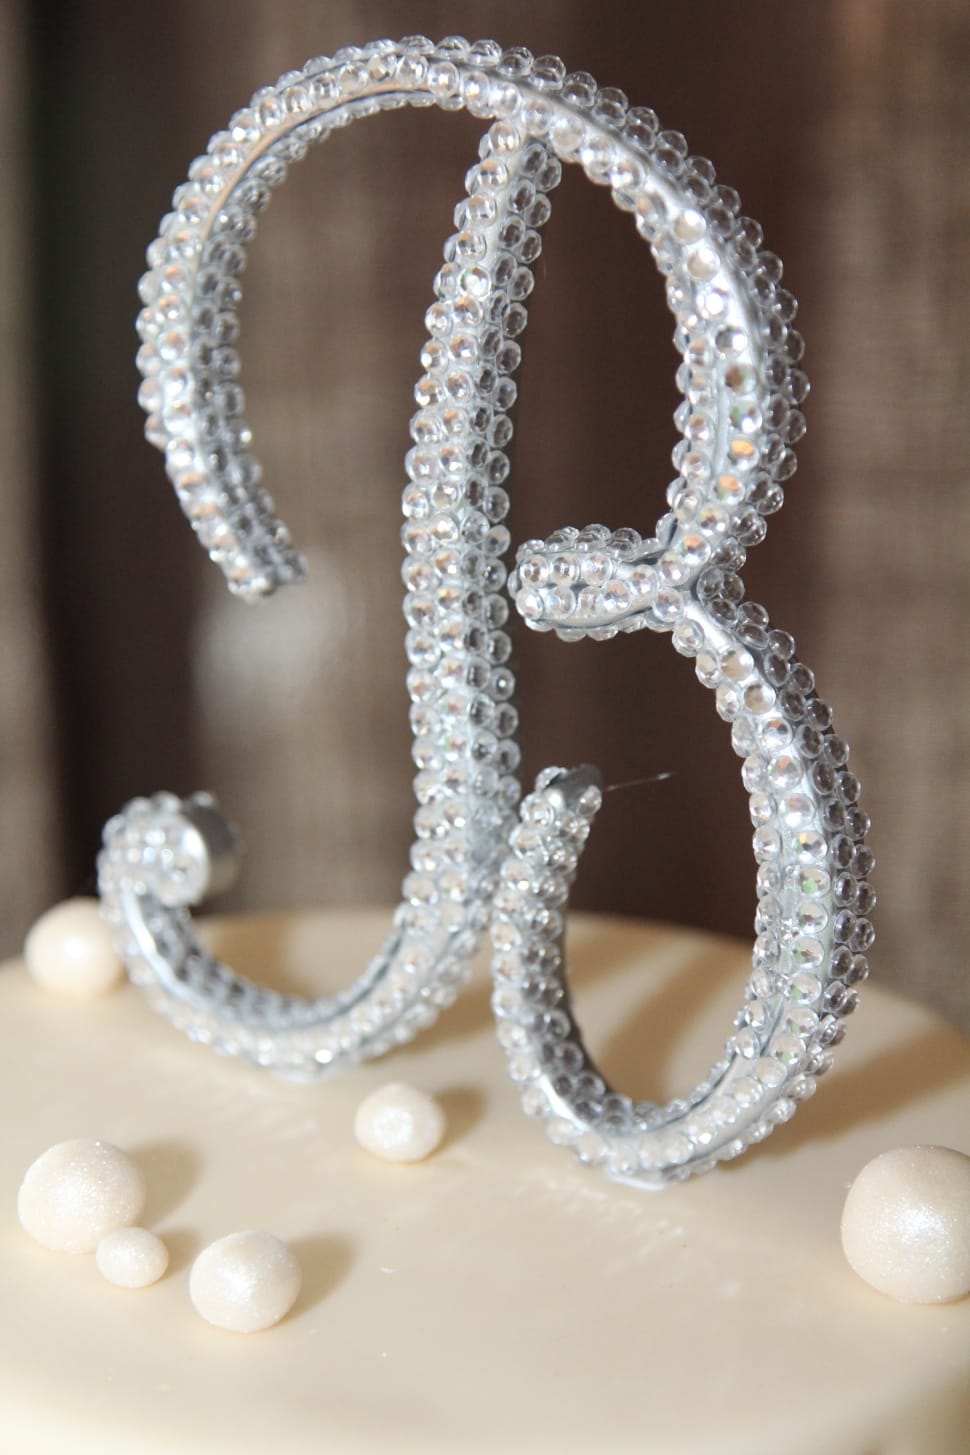 silver and diamond inverted letter b cake top decor preview